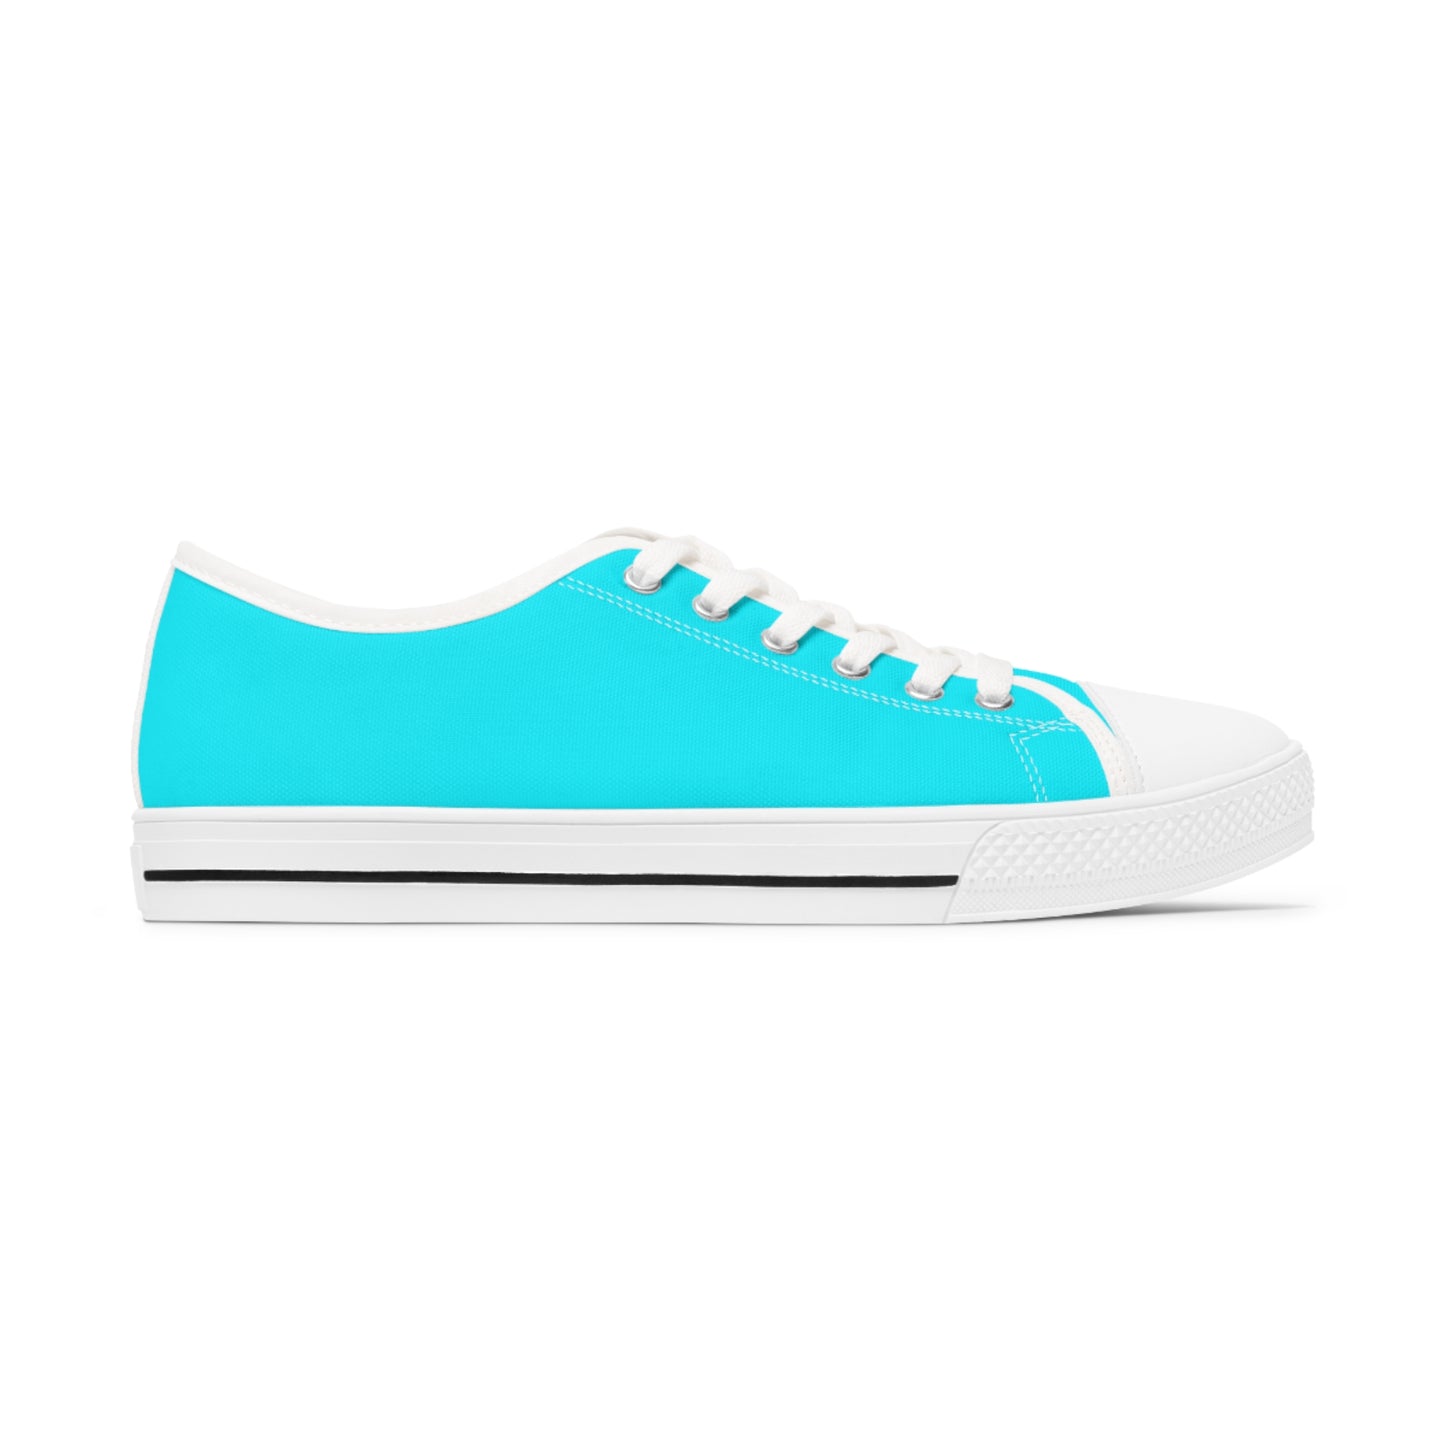 Women's Canvas Low Top Solid Color Sneakers - Cool Pool Aqua Blue US 12 White sole